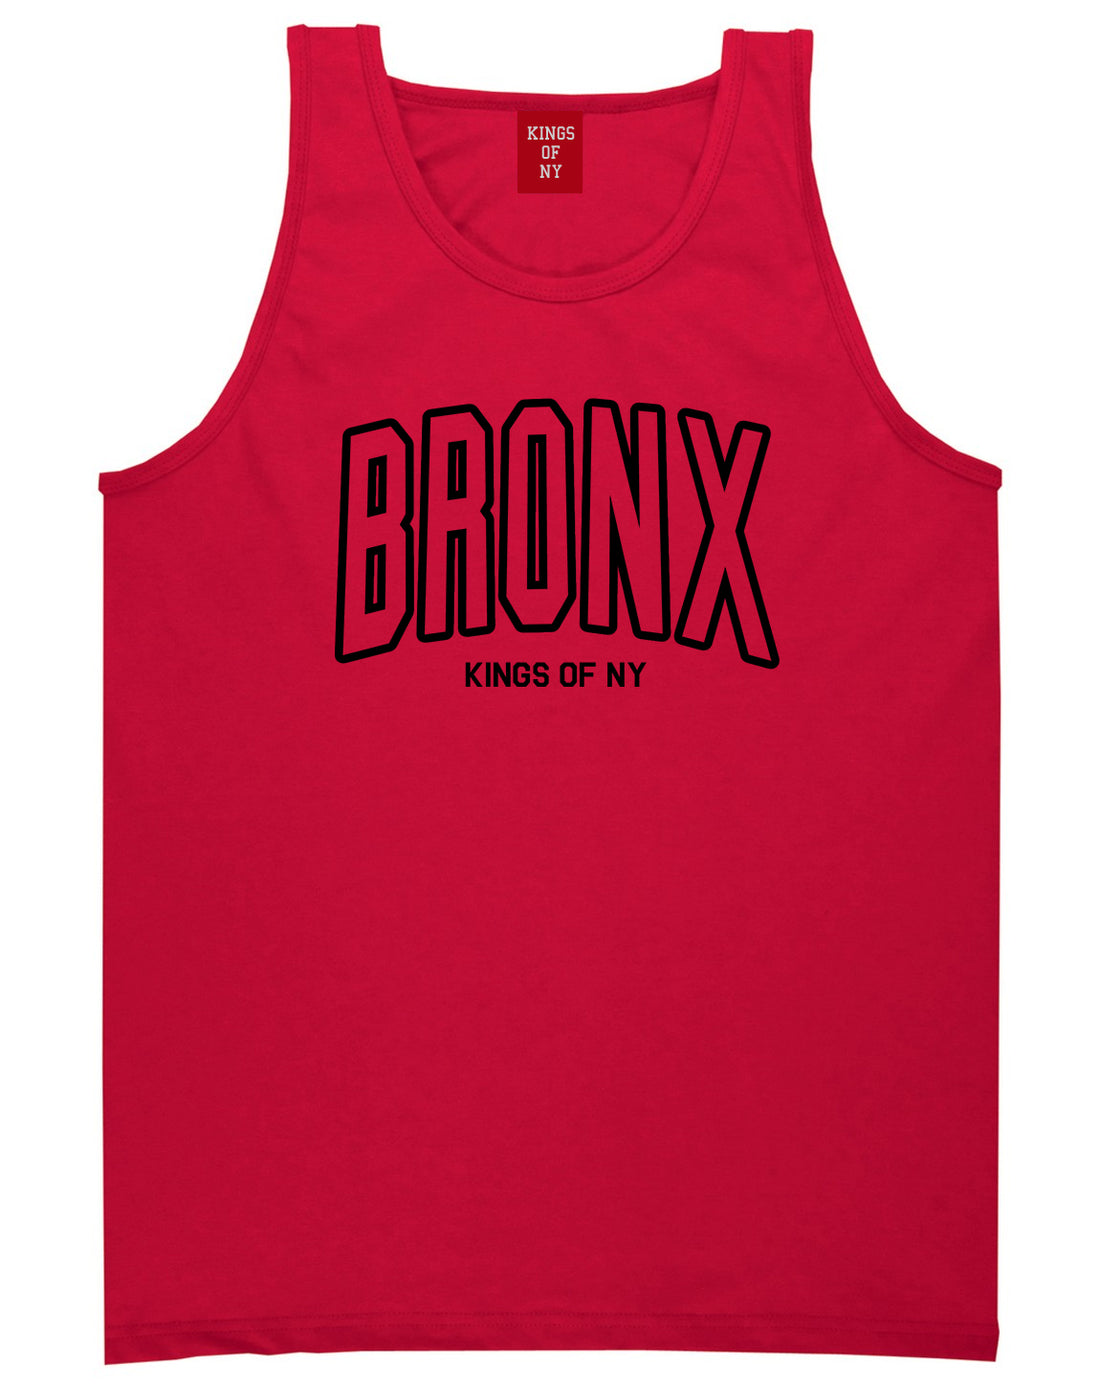 BRONX College Outline Mens Tank Top Shirt Red by Kings Of NY